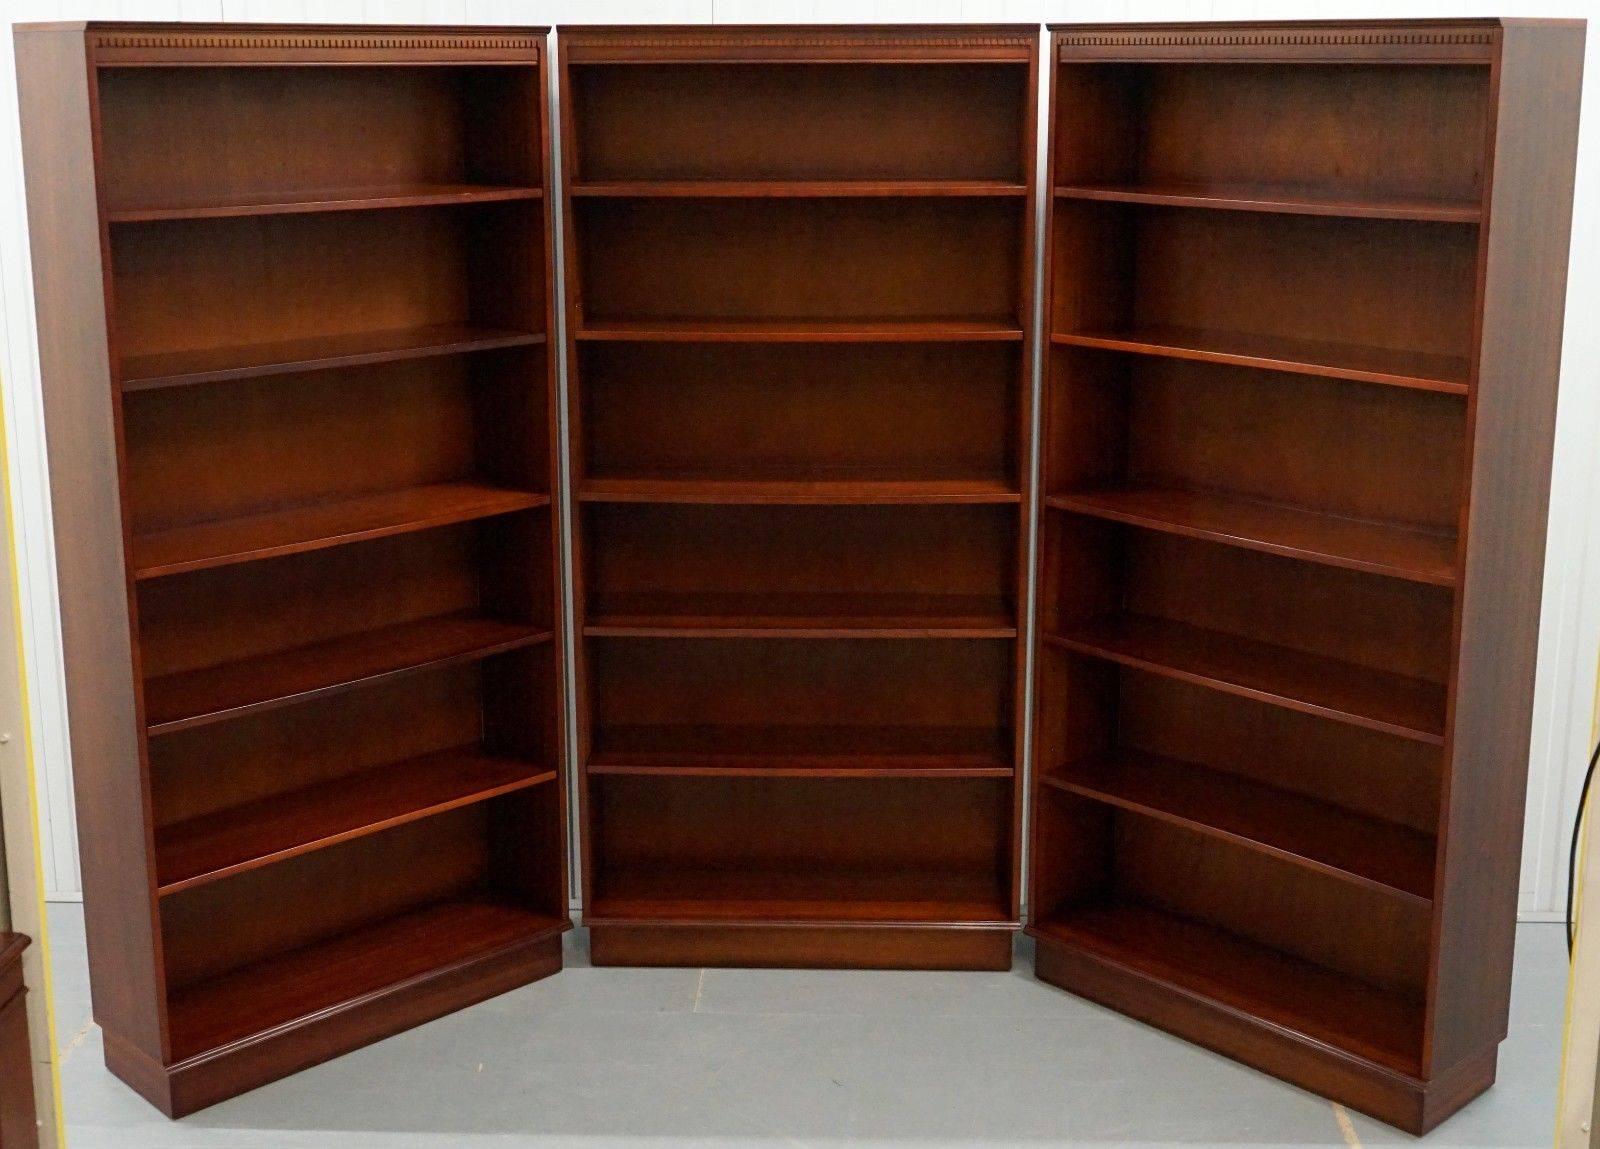 We are delighted to offer for sale this lovely set of three full-sized Beresford & Hicks handmade in England solid mahogany Library bookcases

All stamped to the rear with the original labels, some still have the date stamp of 04/09/84

This